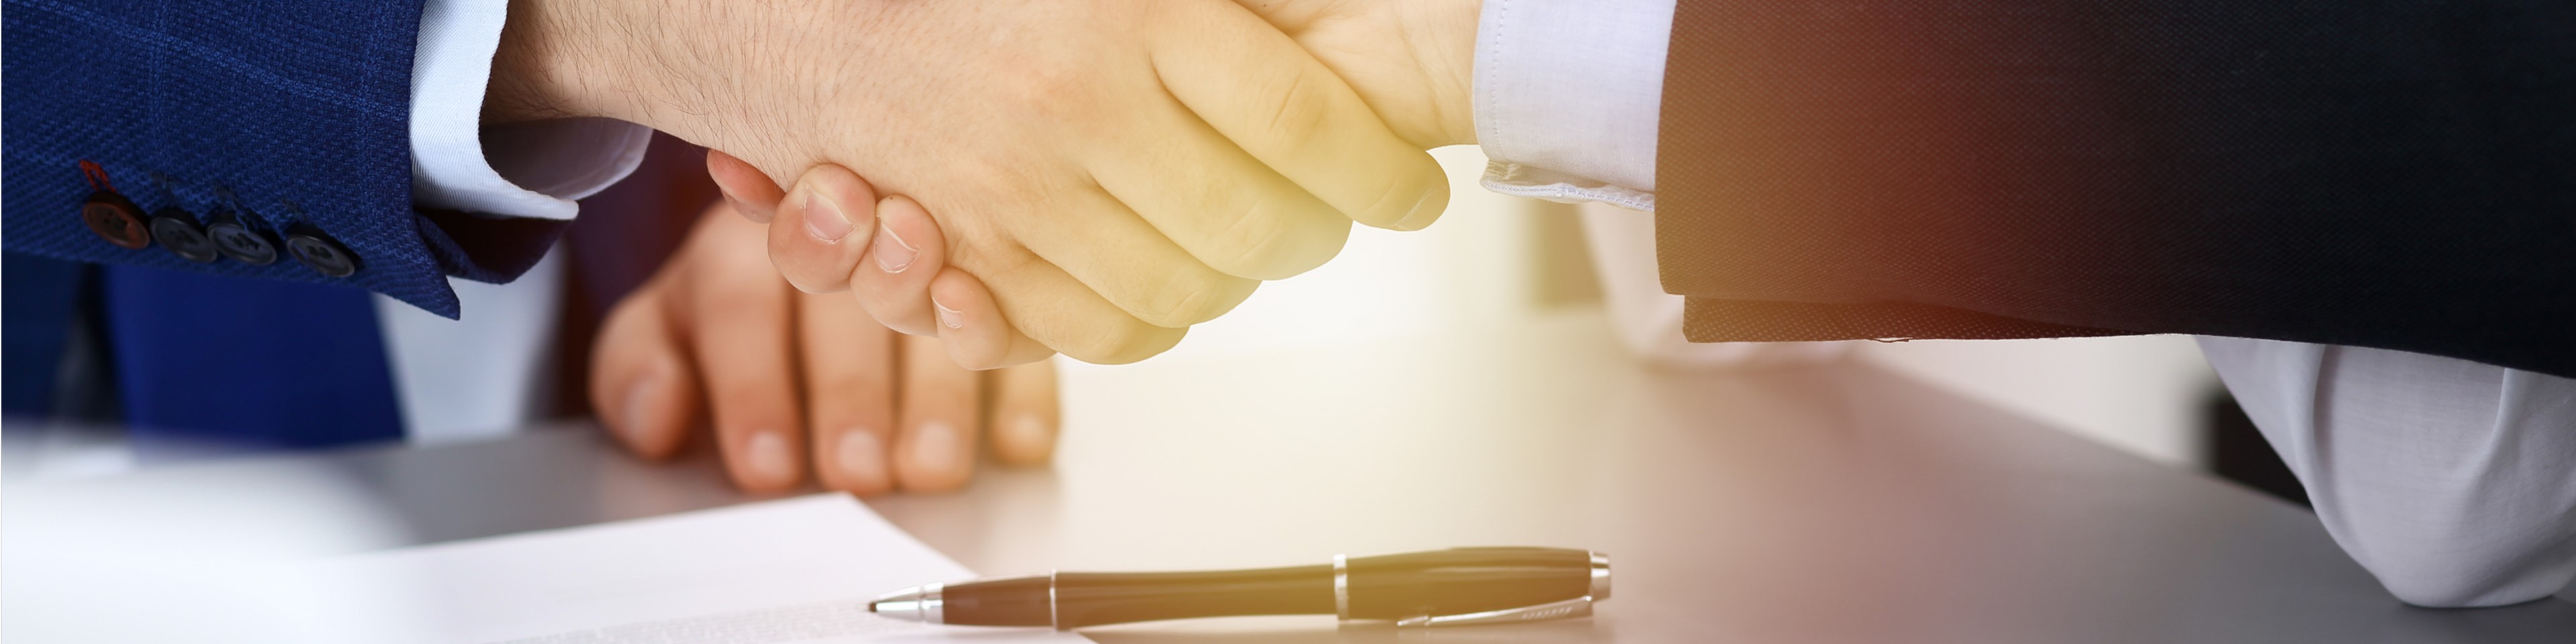 Business people shaking hands, finishing up a papers signing. Meeting, agreement and lawyer consulting concept.